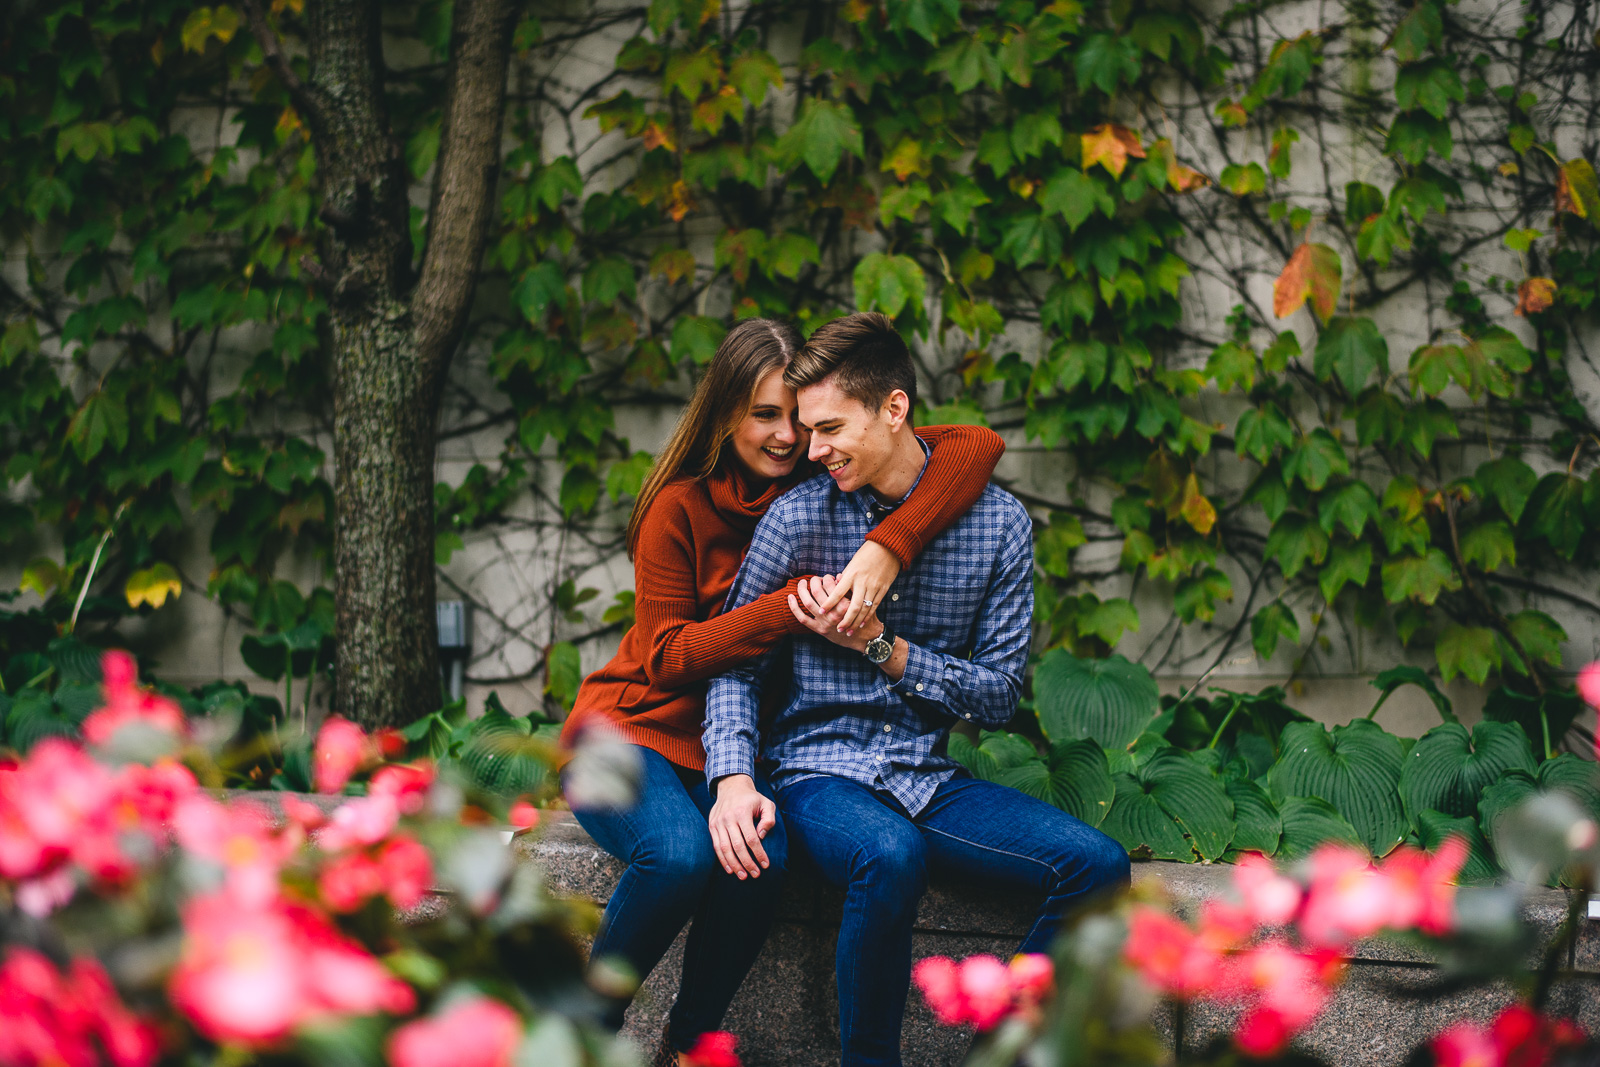 fun engagement photography in chicago - Chicago Fall Engagement Photos // Marta + Kevin